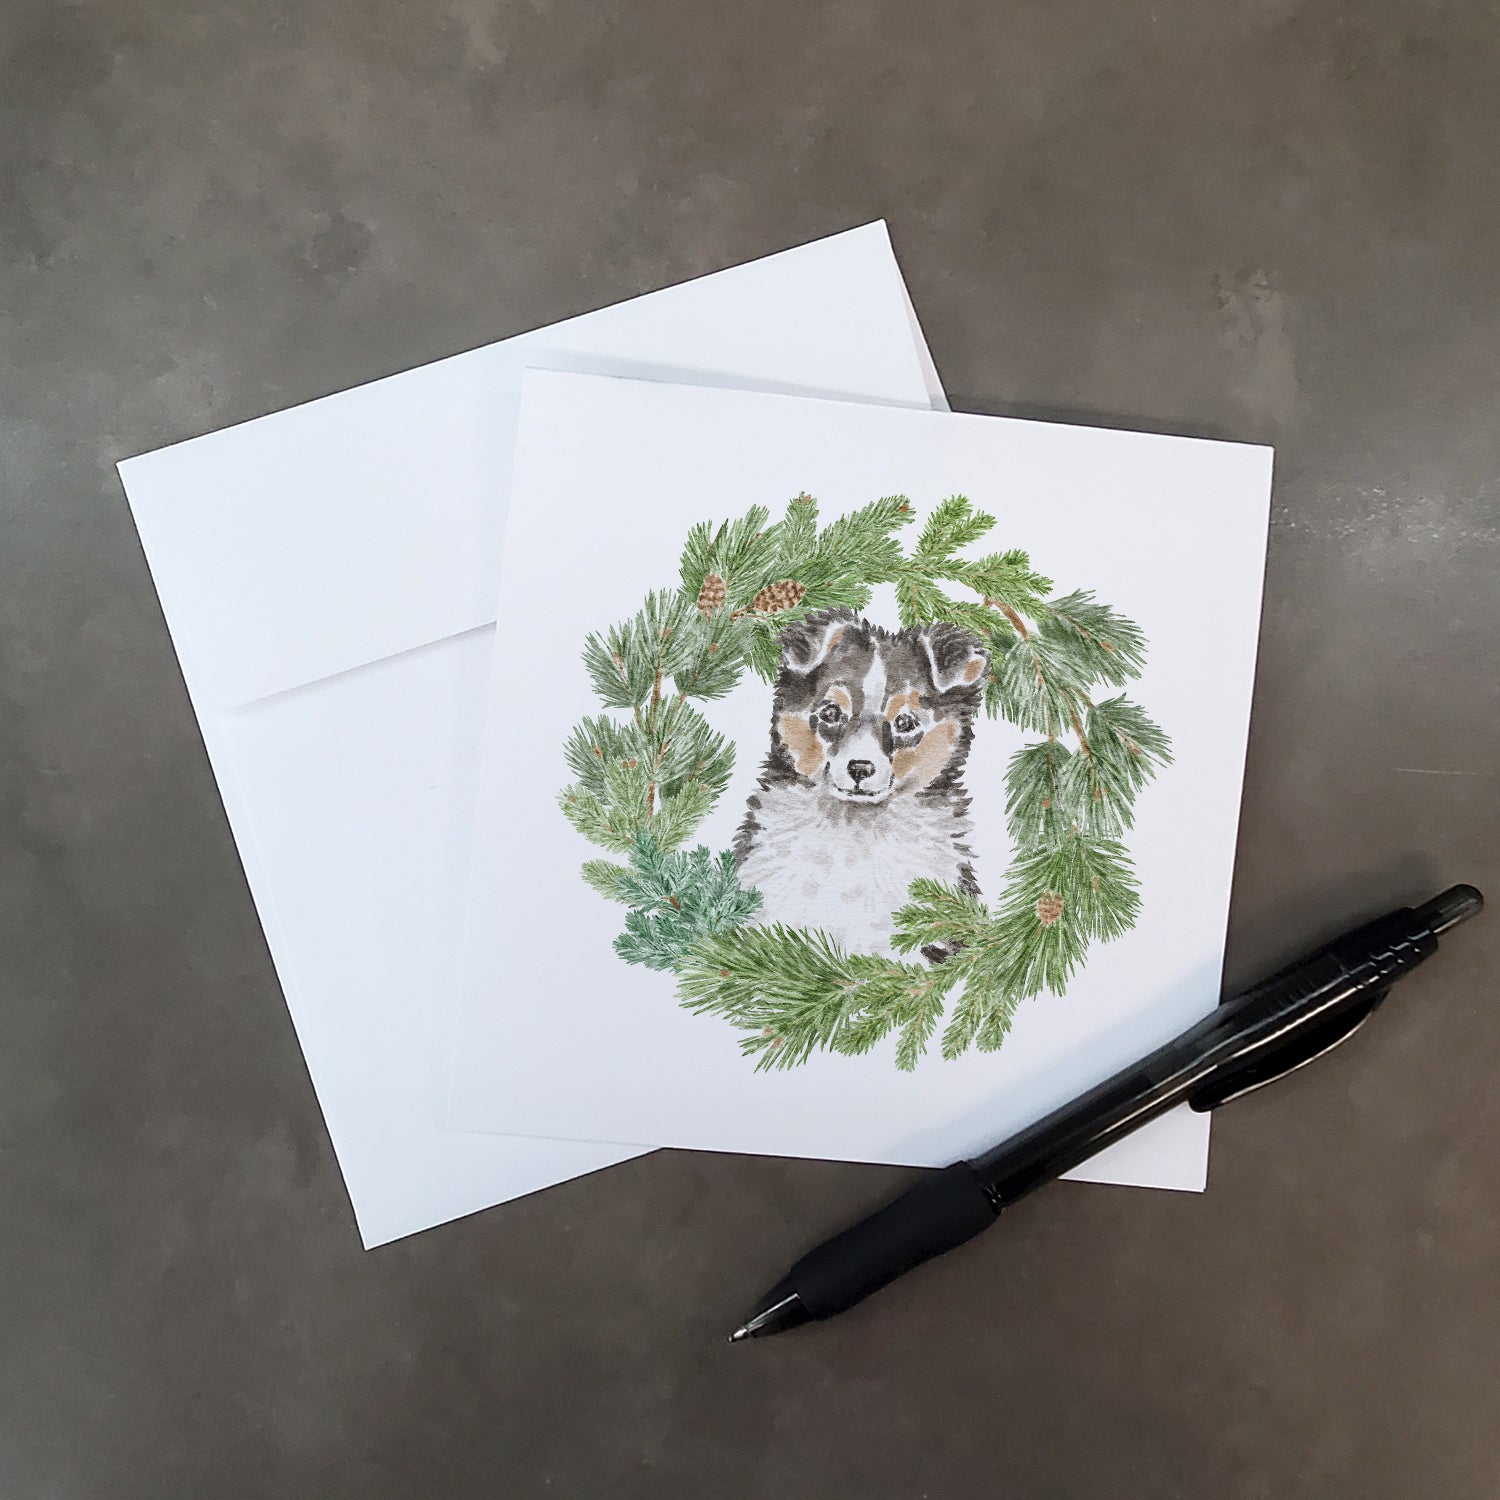 Sheltie/Shetland Sheepdog Puppy Tricolor with Christmas Wreath Square Greeting Cards and Envelopes Pack of 8 - the-store.com